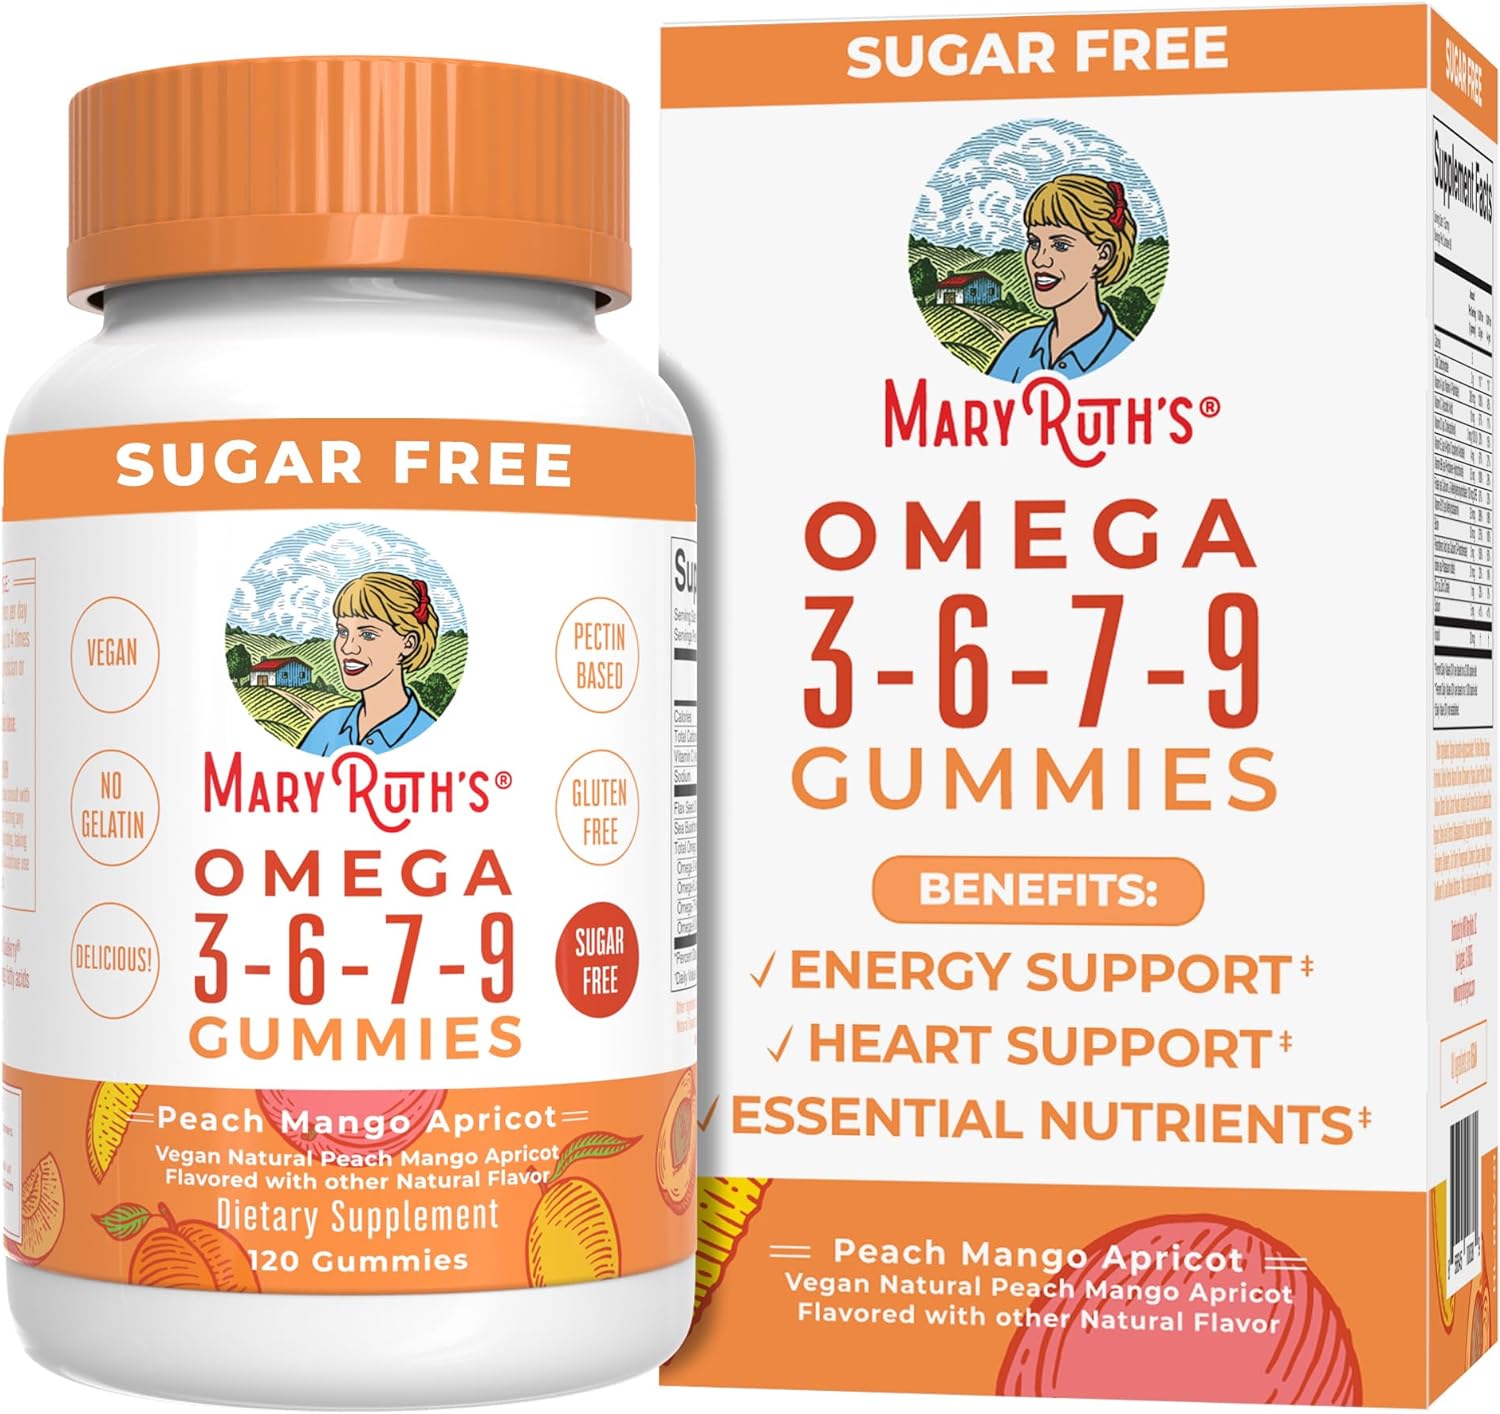 Vegan Omega 3 6 7 9 Gummies by MaryRuth's | Up to 4 Month Supply | Omega 3 Supplement with Flaxseed 